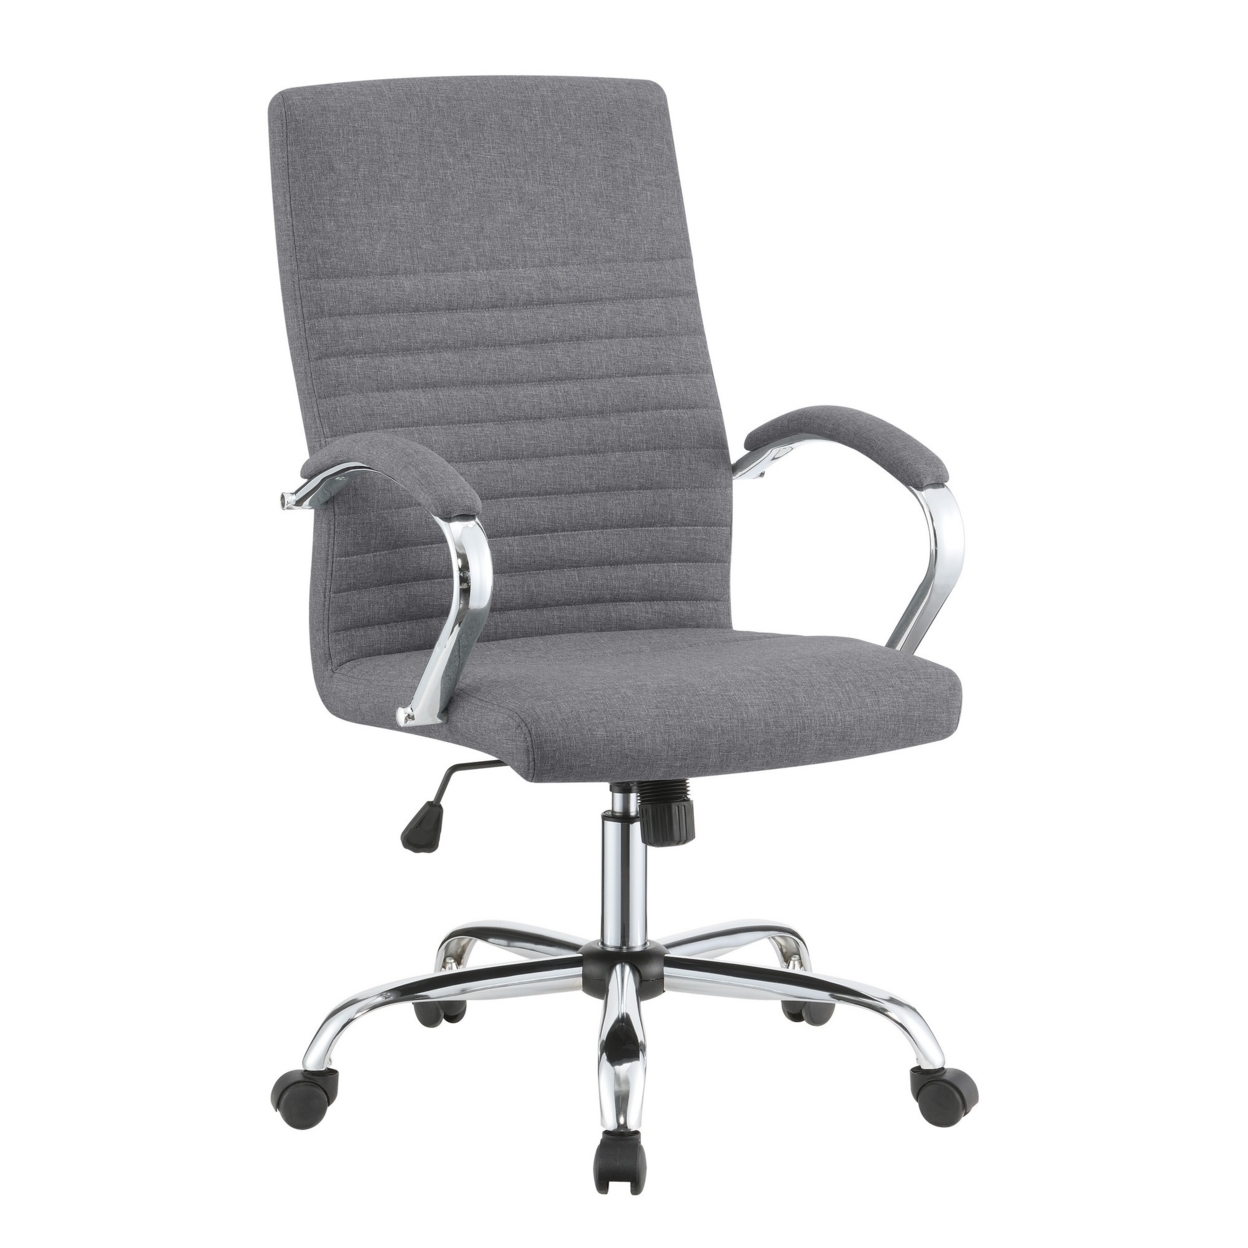 Office Chair With Horizontal Stitching And Curved Seat, Gray- Saltoro Sherpi